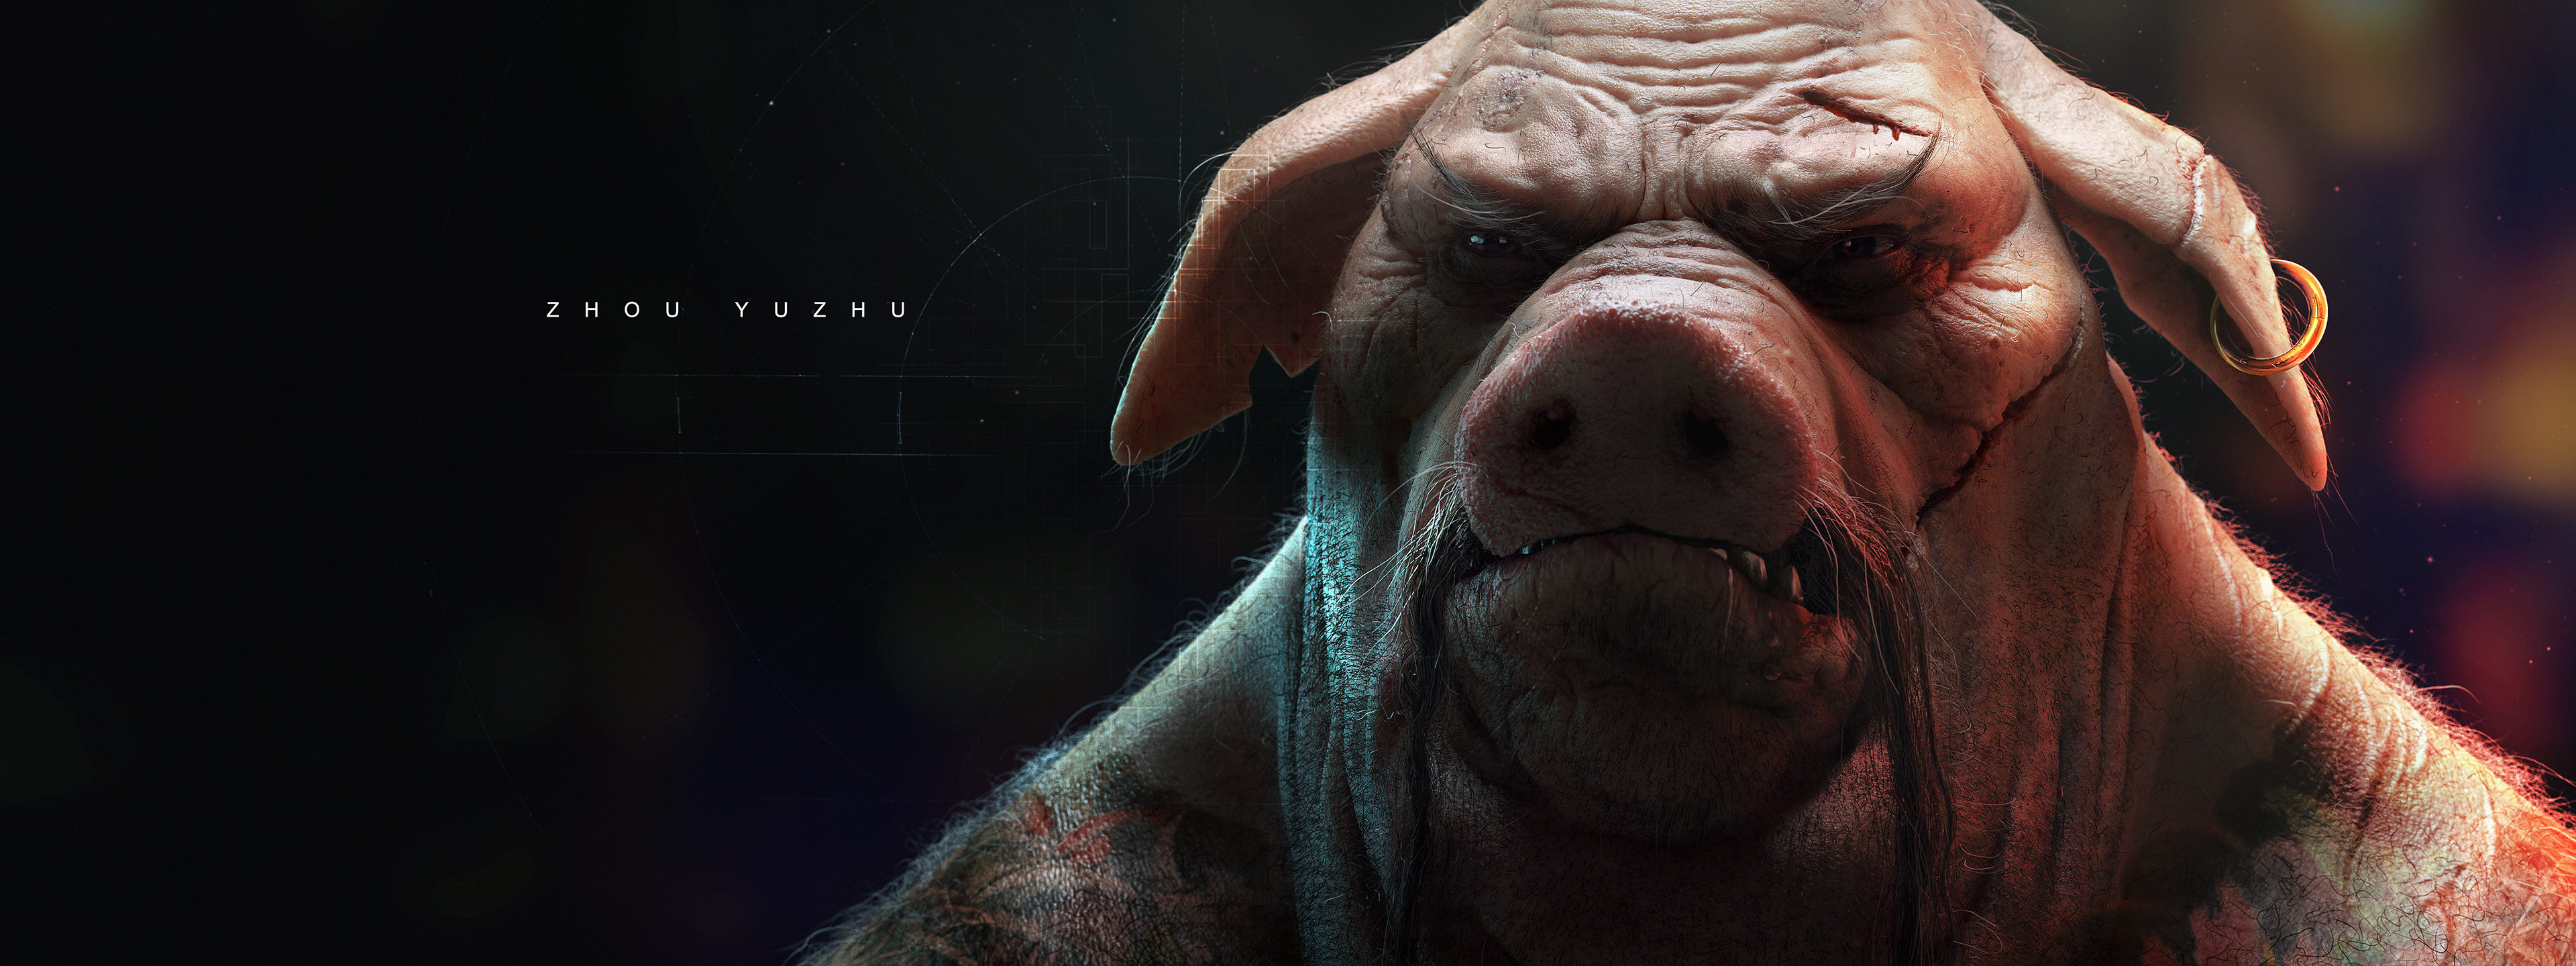 Beyond Good and Evil (Game): Wild Boar, One of the major characters in the video game, An action-adventure. 3840x1440 Dual Screen Background.